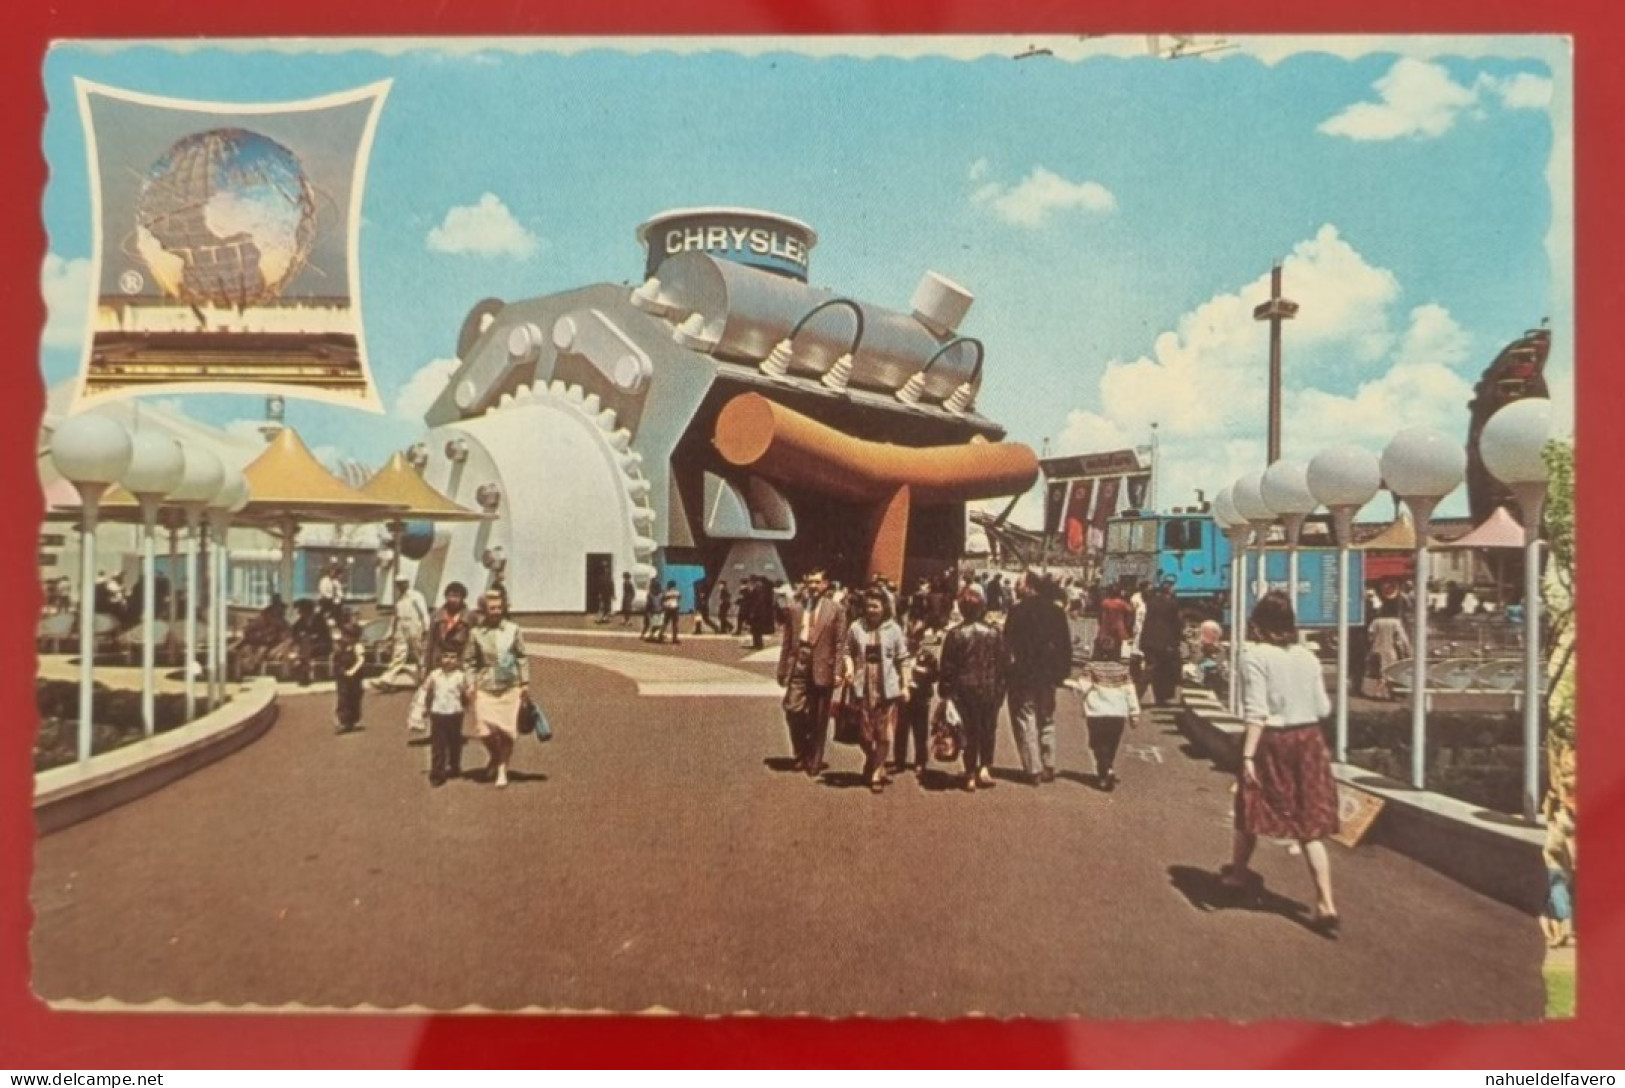 Uncirculated Postcard - USA - NY, NEW YORK WORLD'S FAIR 1964-65 - THIS IS CHRYSKER CORPORATION'S GIANT - Mostre, Esposizioni